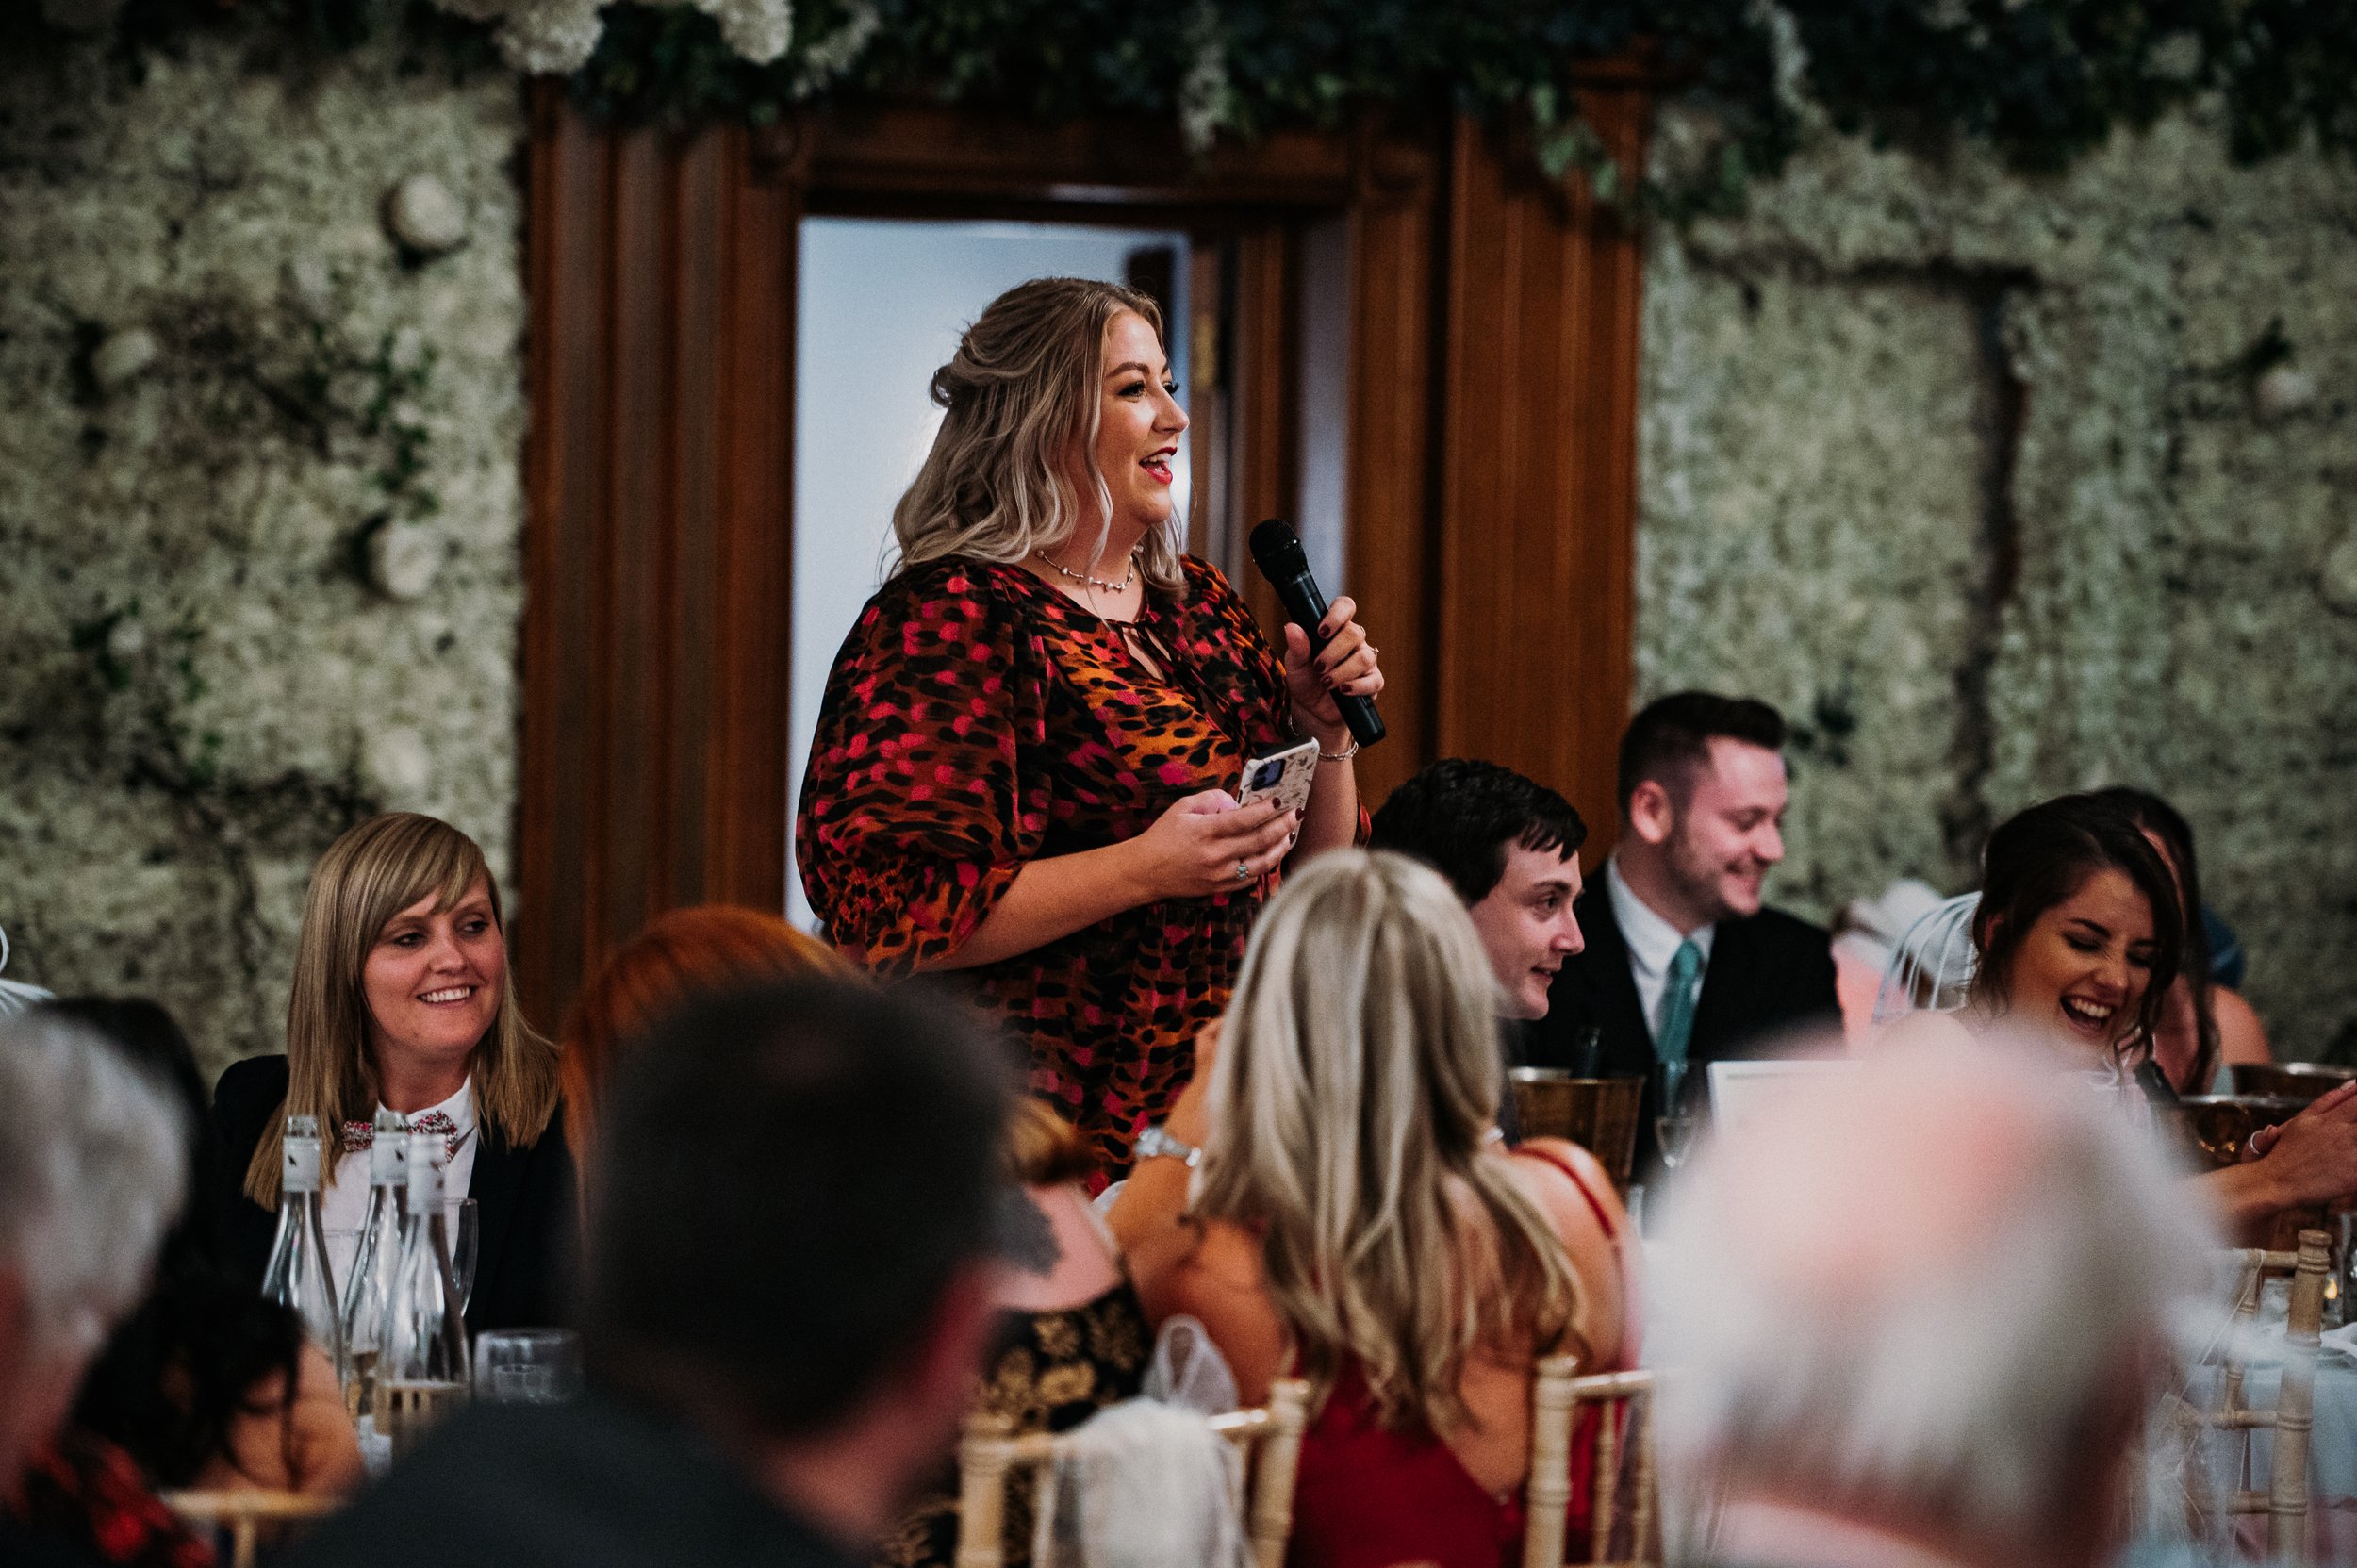 One of the guests standing up and sharing a slightly rude limerick that was written about the bride and groom.